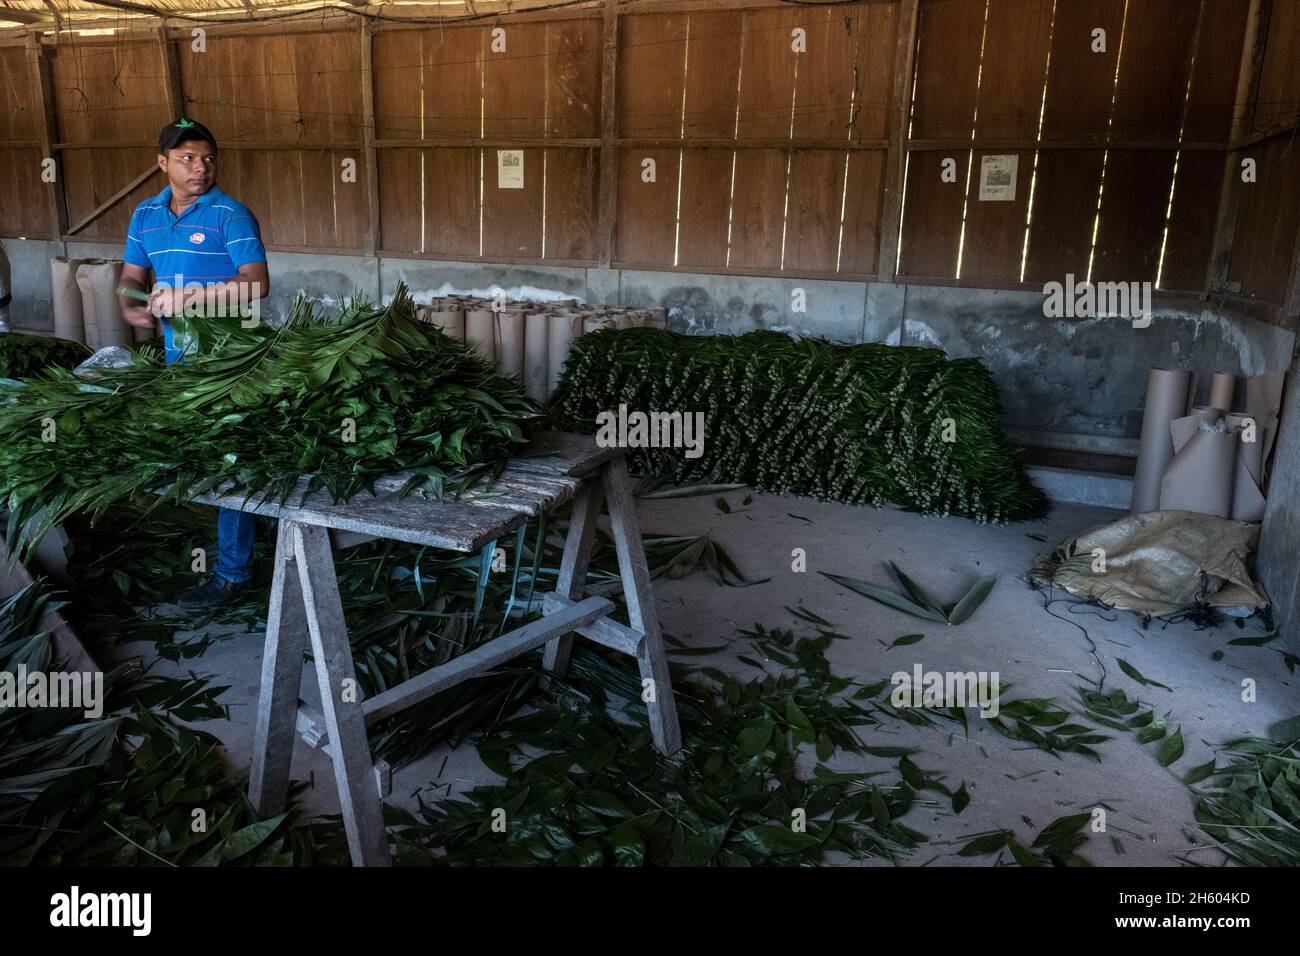 November 2017. A worker sorts and processes xate (palm leaves) Uaxactun, Guatemala. Stock Photo